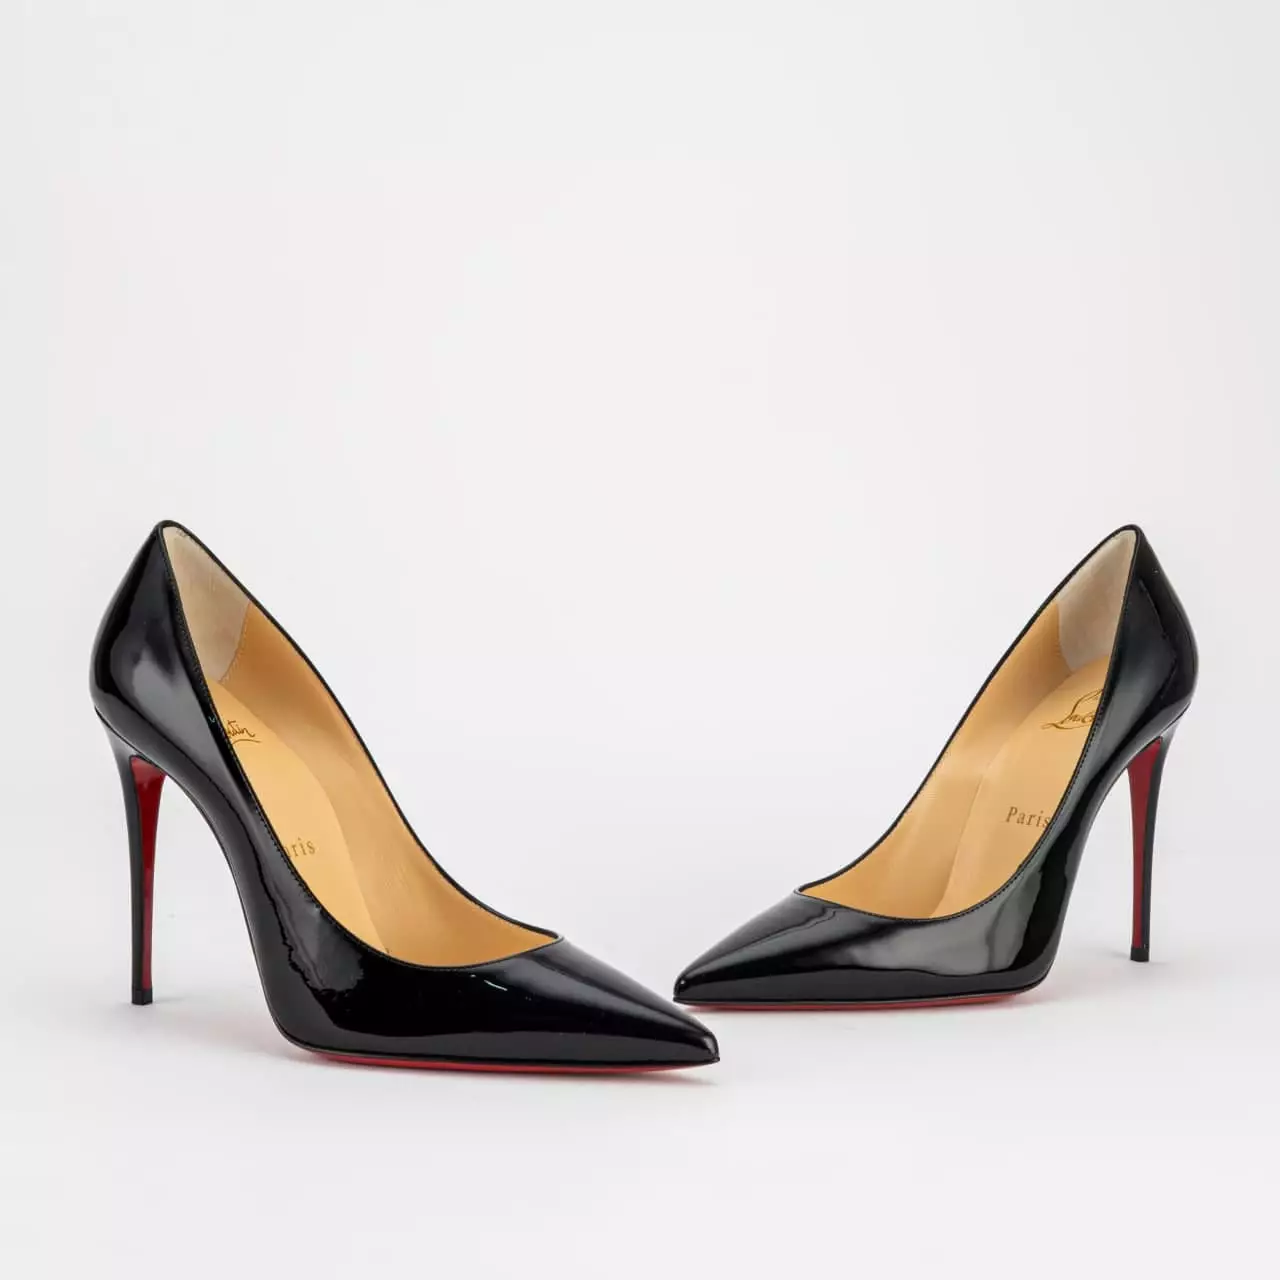 Kate - 100 mm Pumps - Patent calf leather - Black - Christian